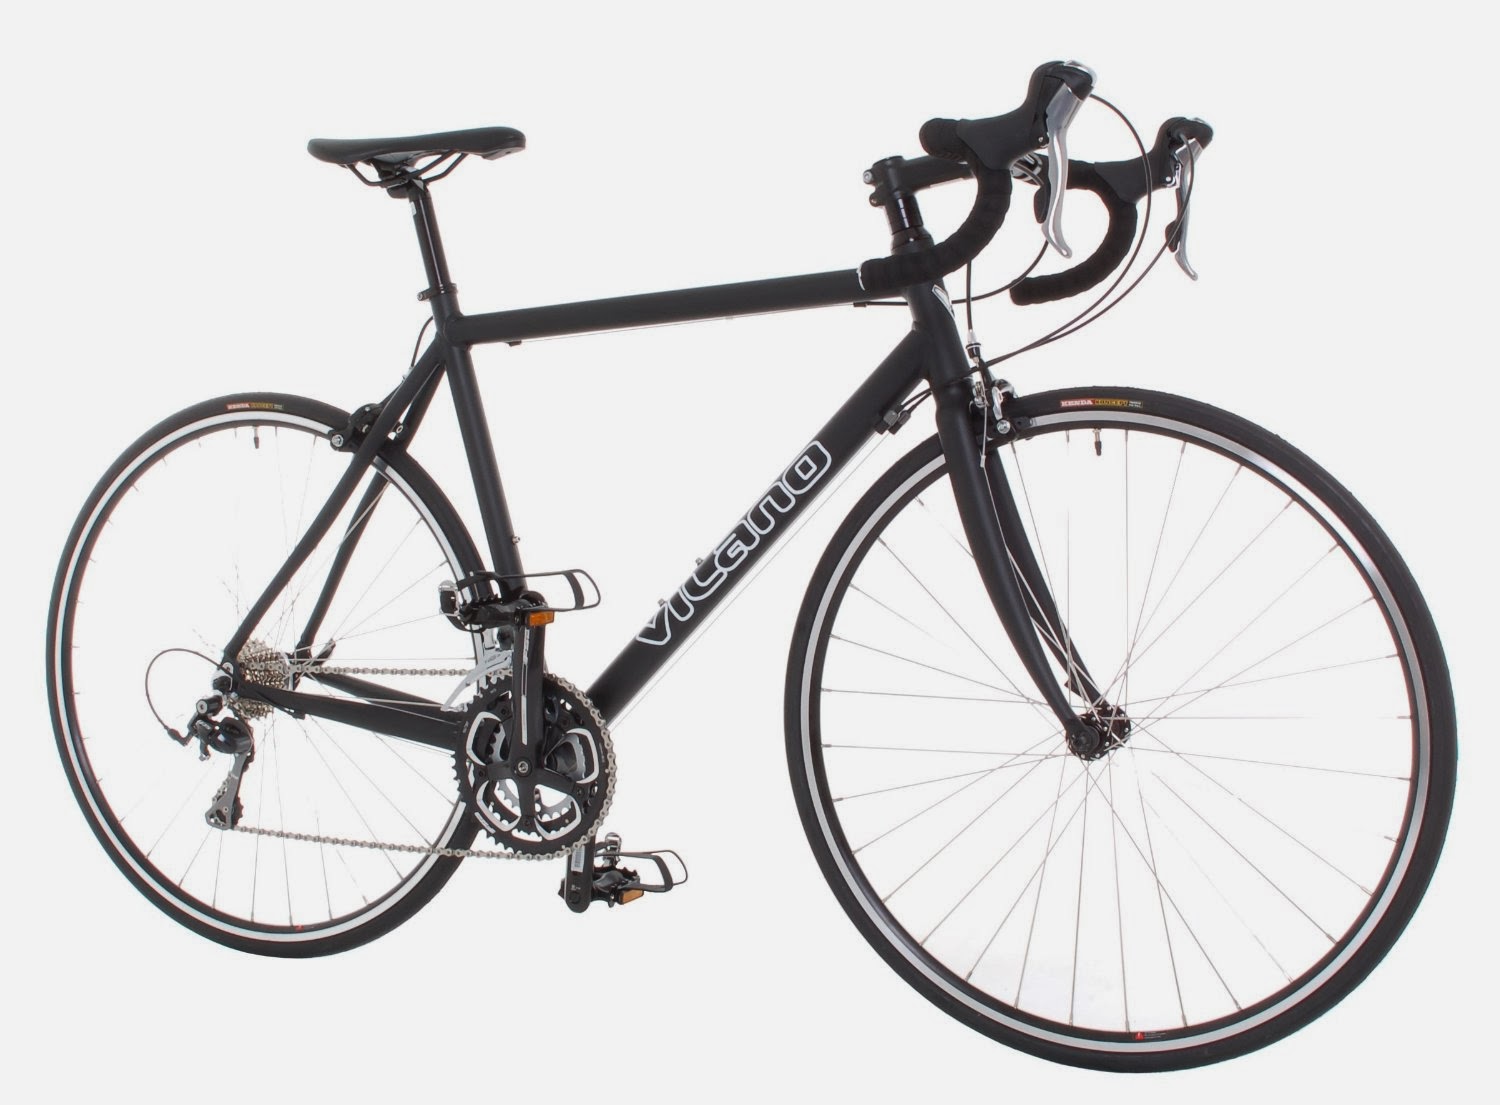 Vilana FORZA 1.0 Aluminium Carbon Fiber Road Bike Shimano 105, review of features, high quality components, lightweight